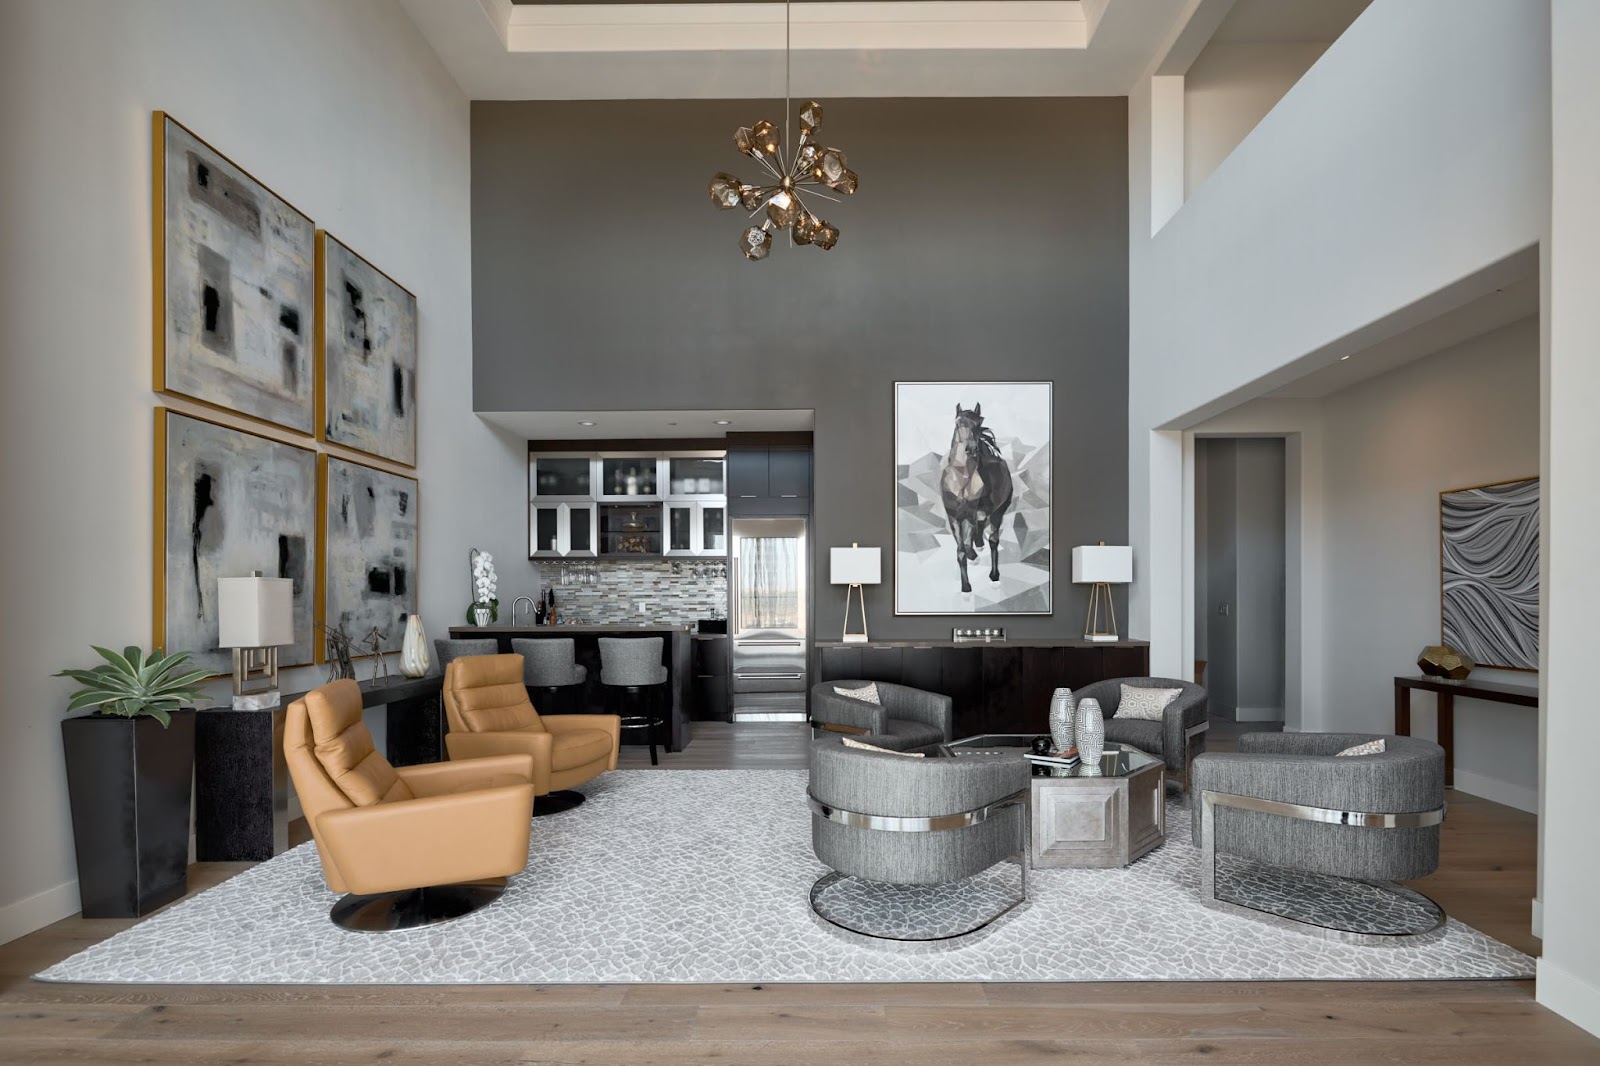 raashi-design-walnut-creek-ca-building-or-buying-existing-elegant-contemporary-living-room-with-statement-lighting